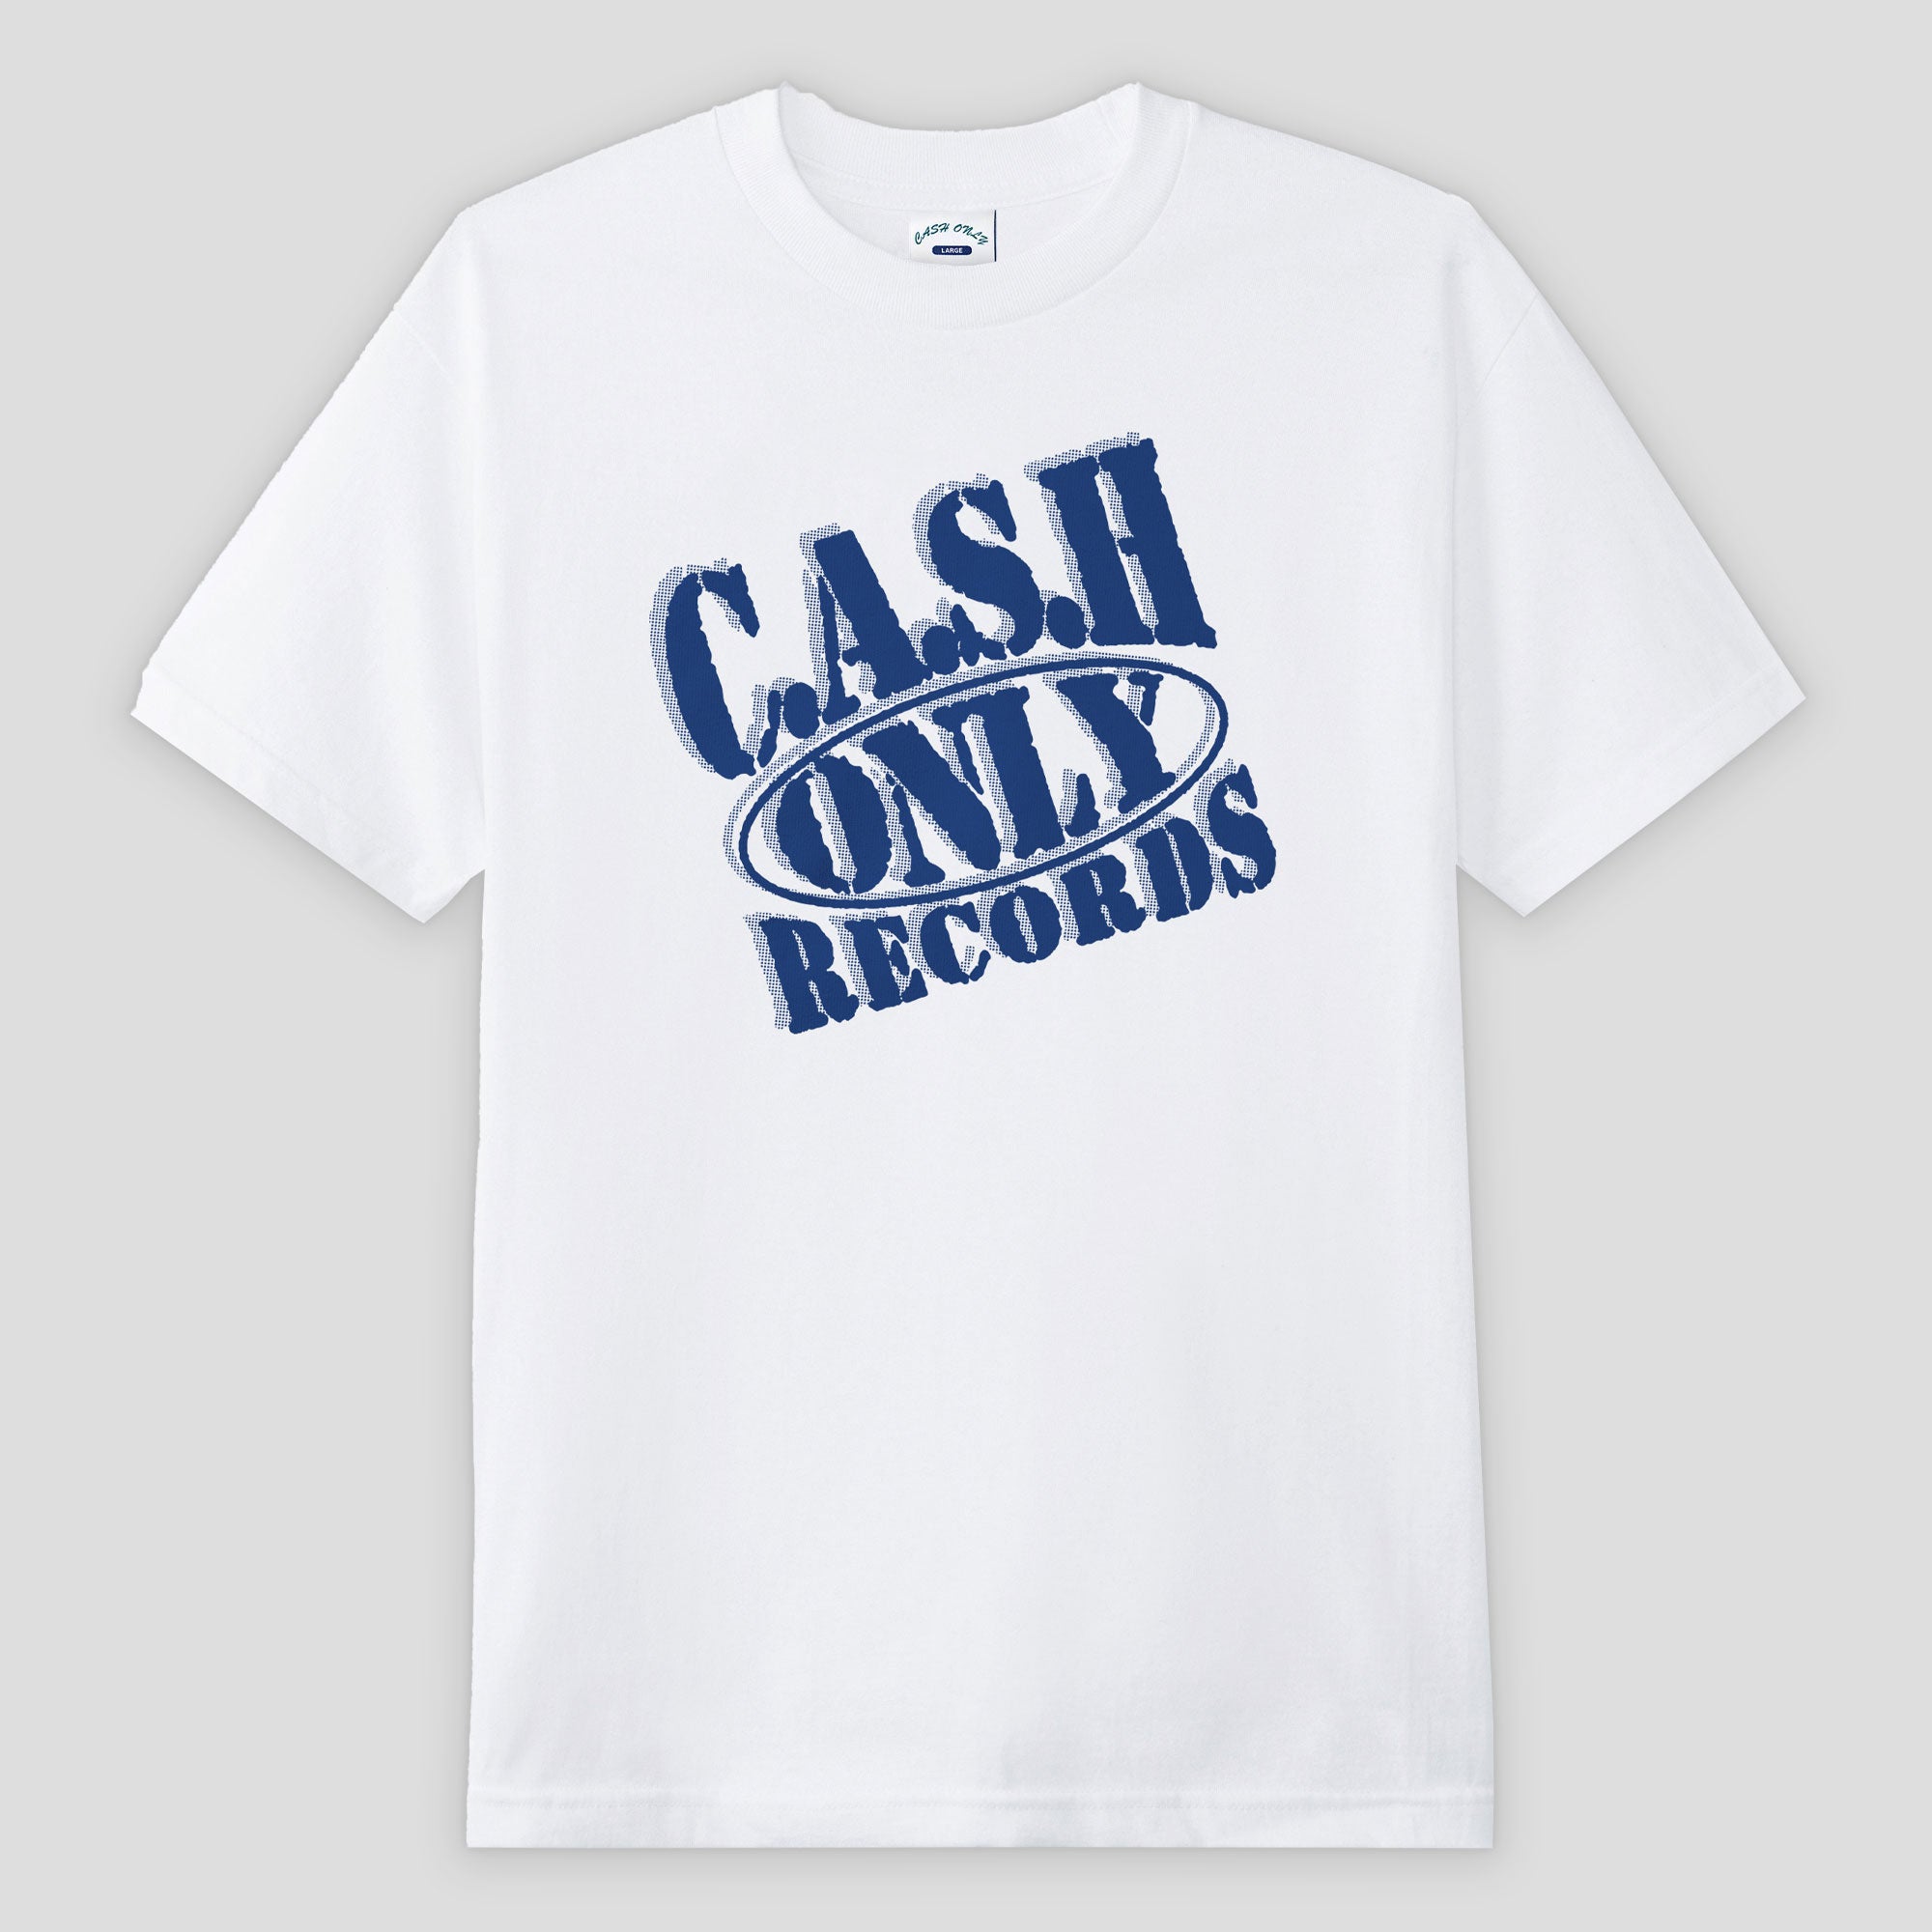 Cash Only Records Tee - White